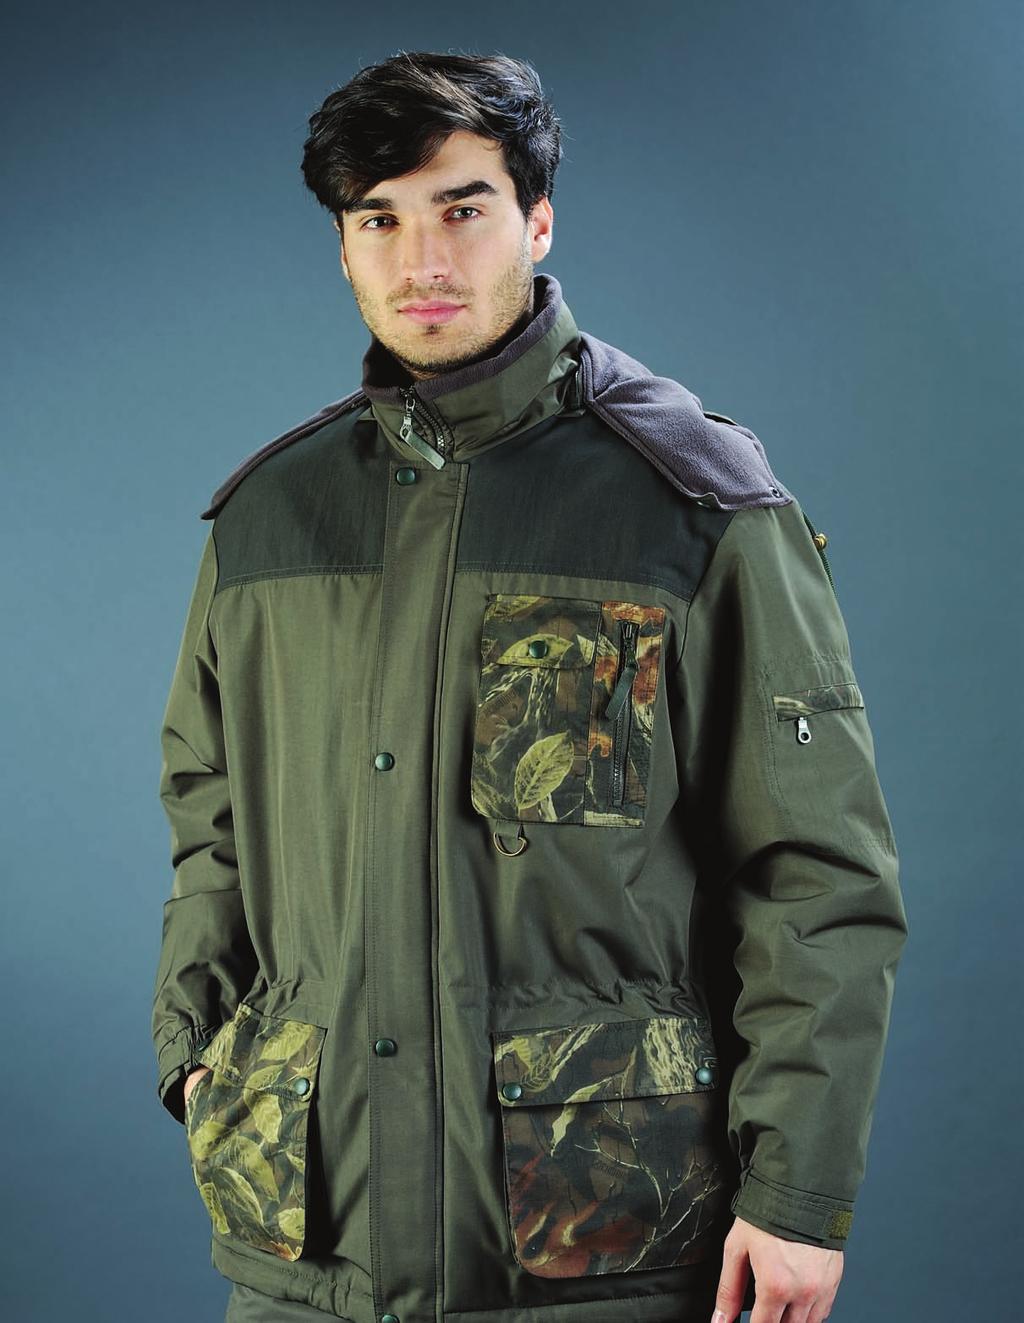 HUNTING WINTER JACKET CODE 10-1242 Functional pockets in camouflage fabric closed with buttons Shoulder and side areas with high resistant fabric Adjustable cuffs Zippered sleeve pocket Adjustable